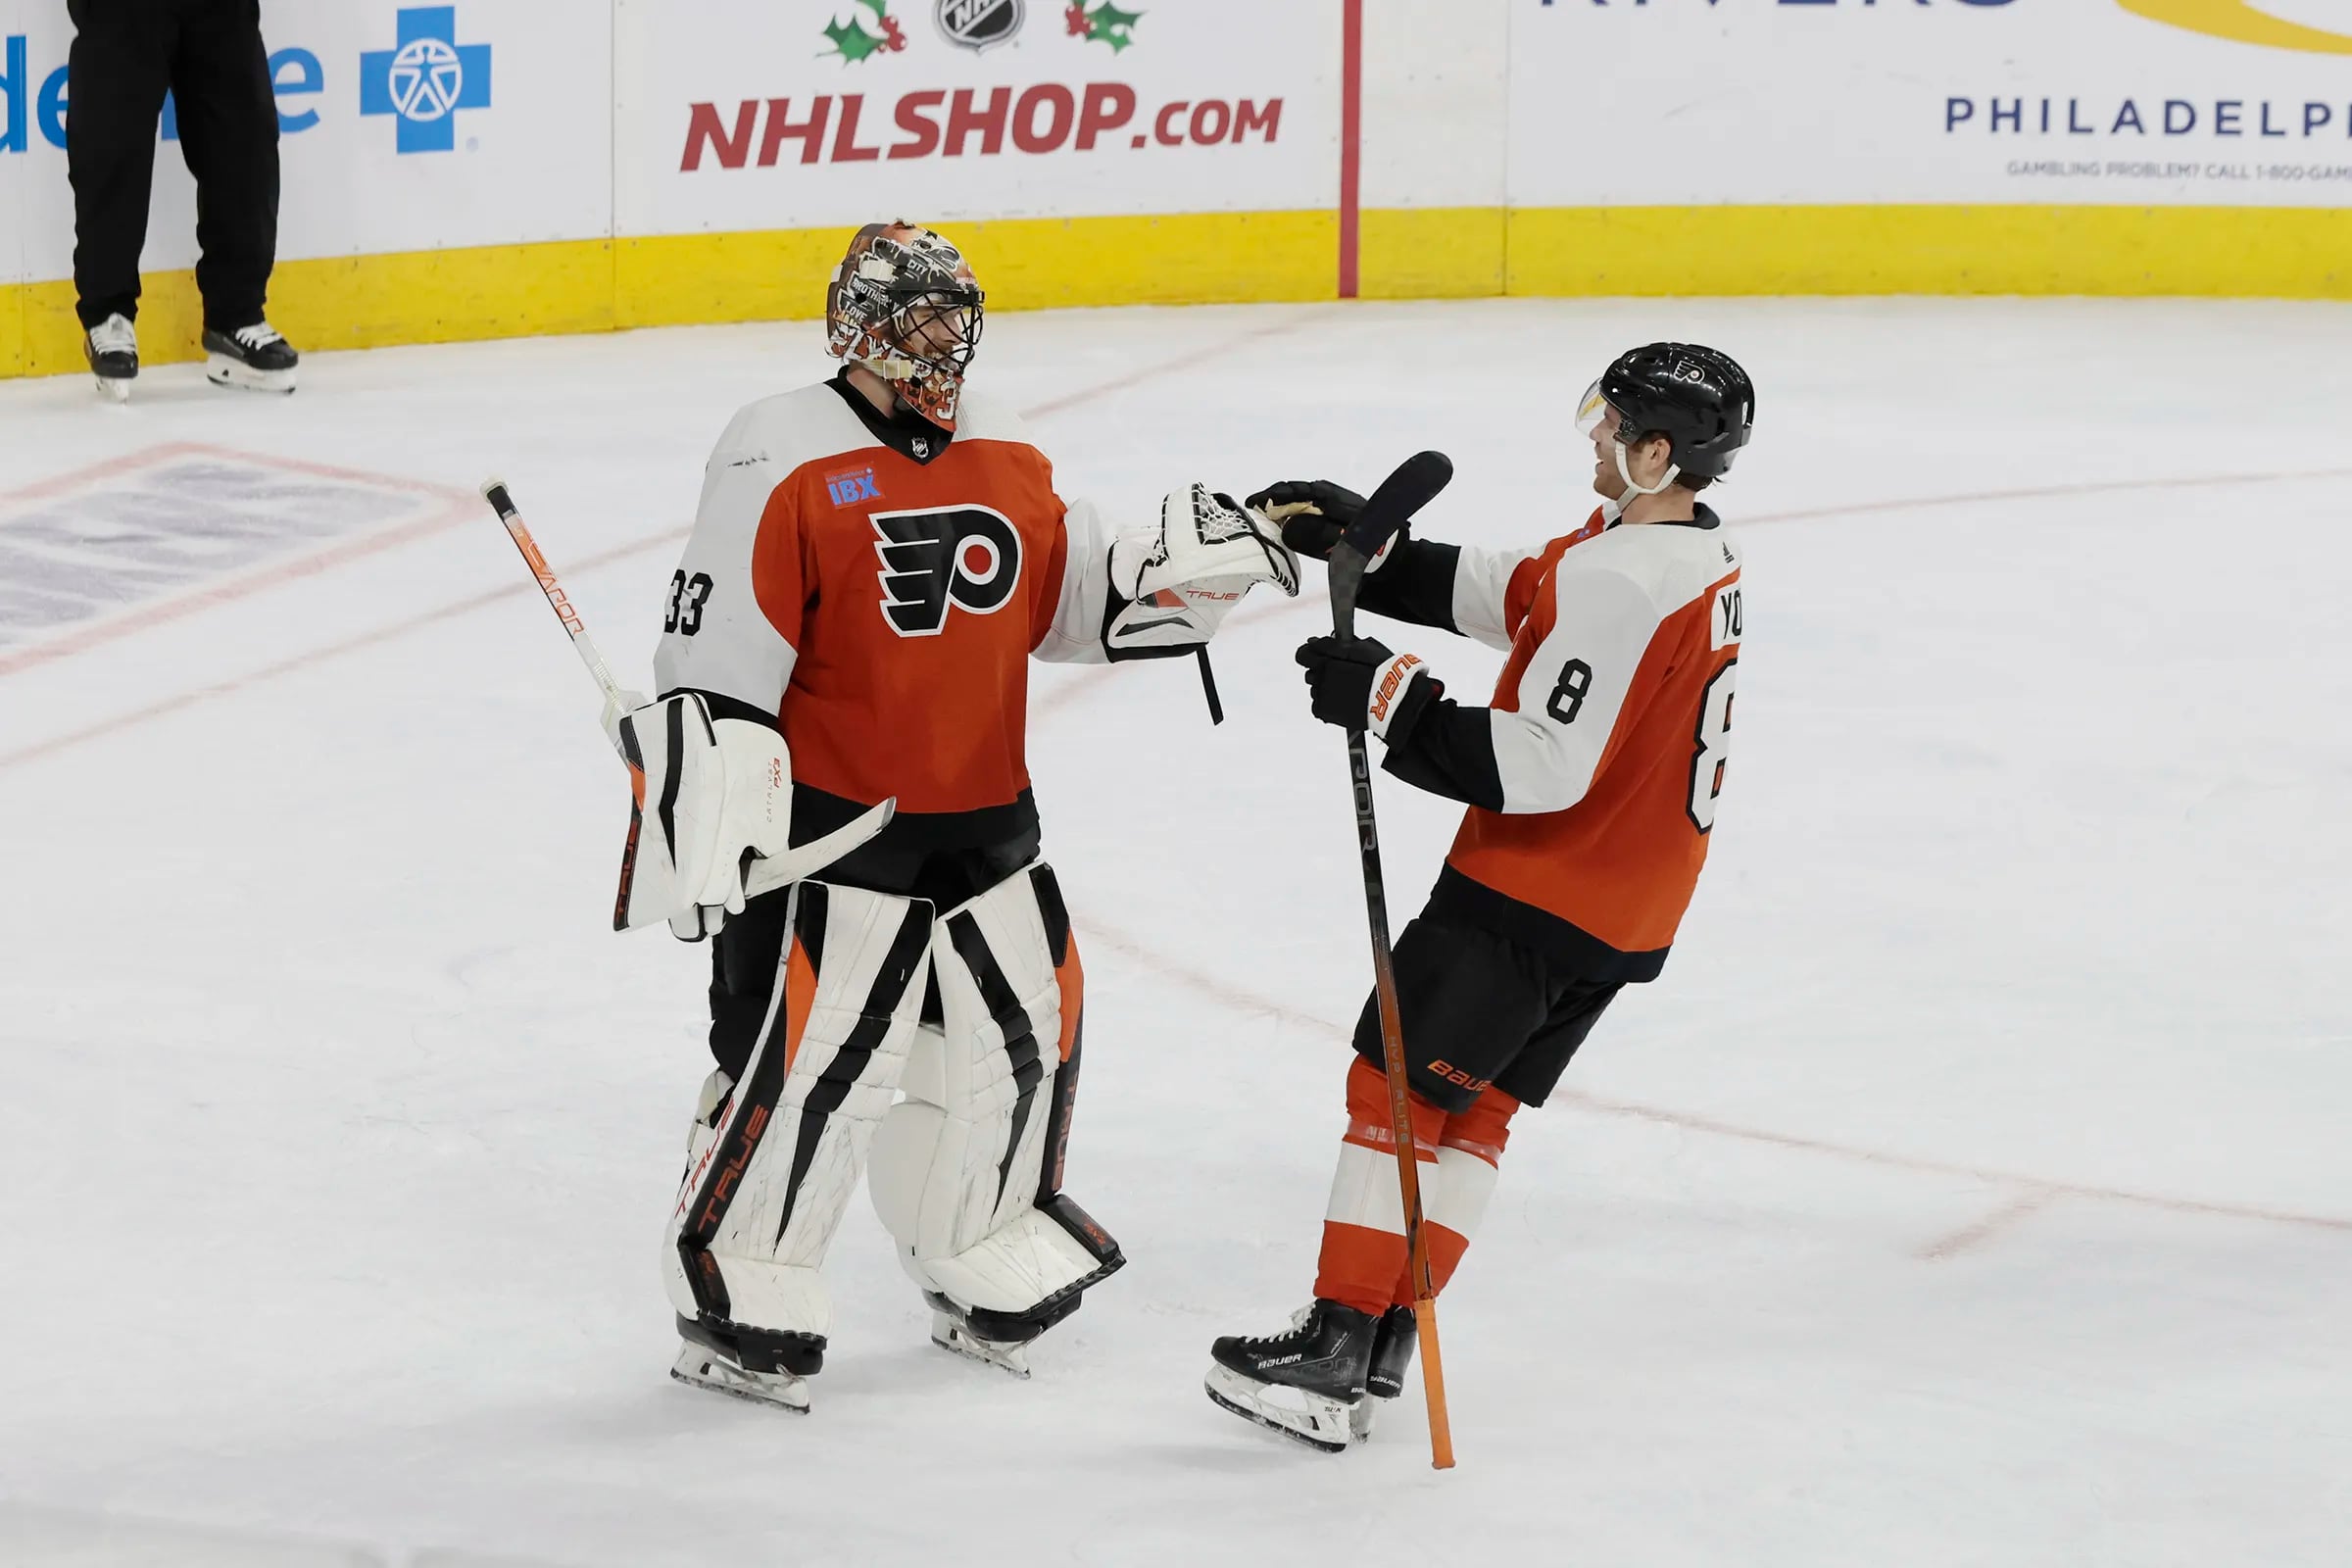 Ersson makes 33 saves, Flyers shut out Red Wings